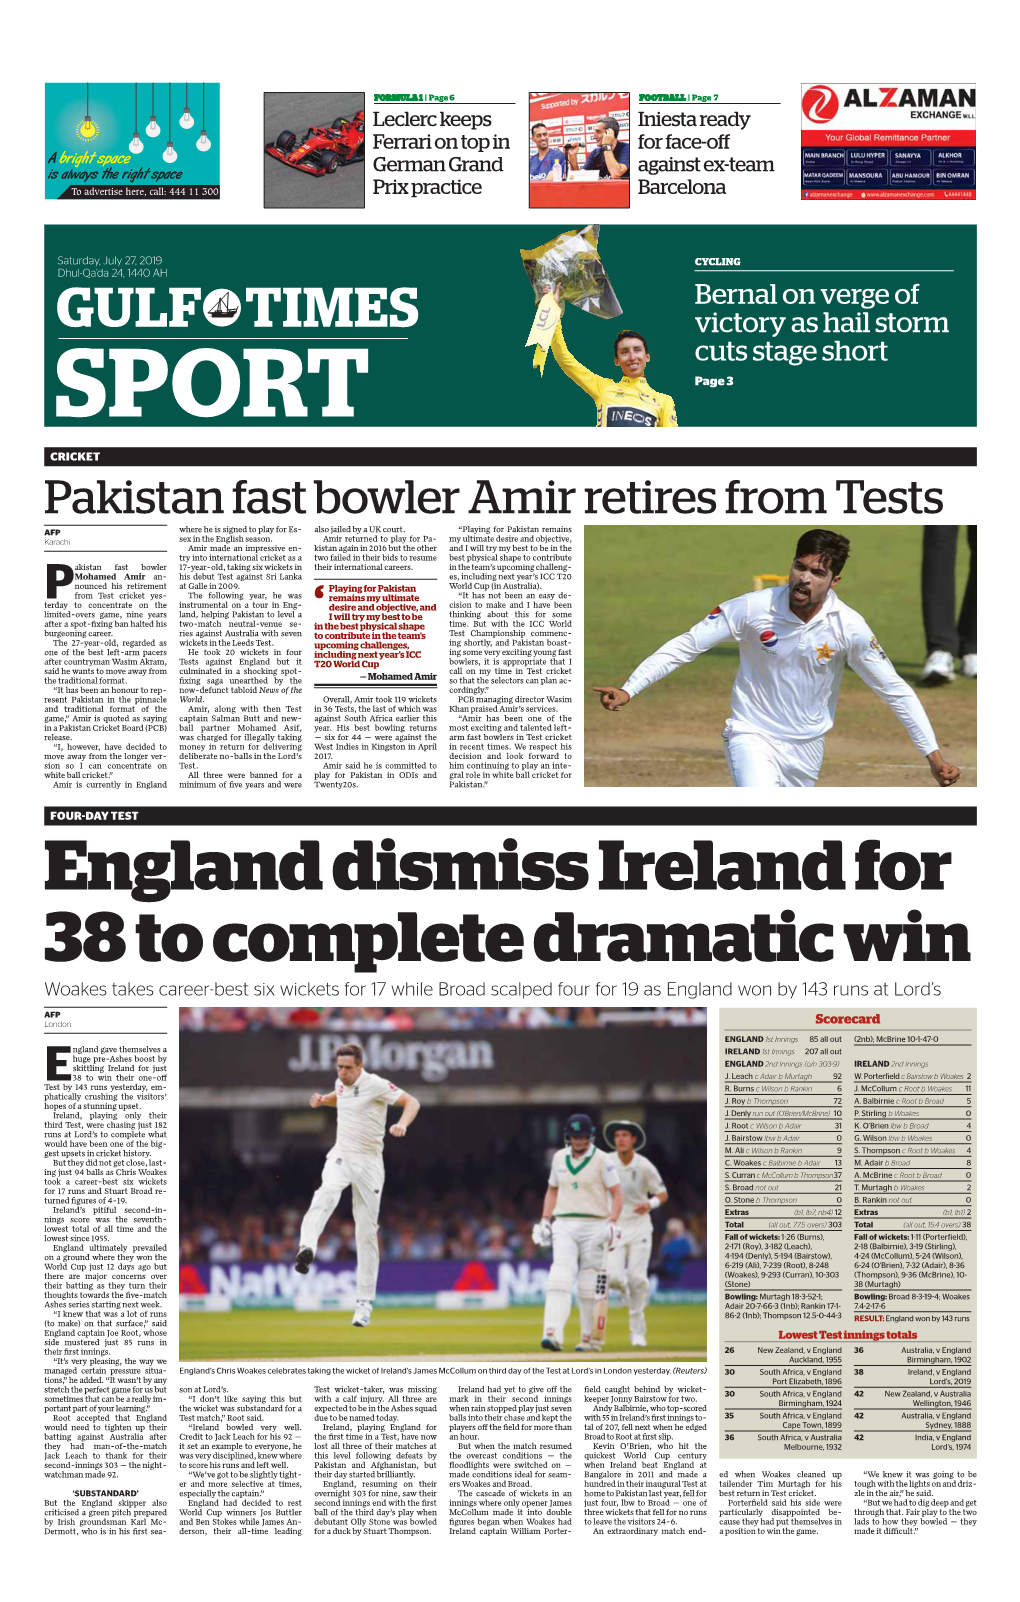 GULF TIMES Victory As Hail Storm Cuts Stage Short SPORT Page 3